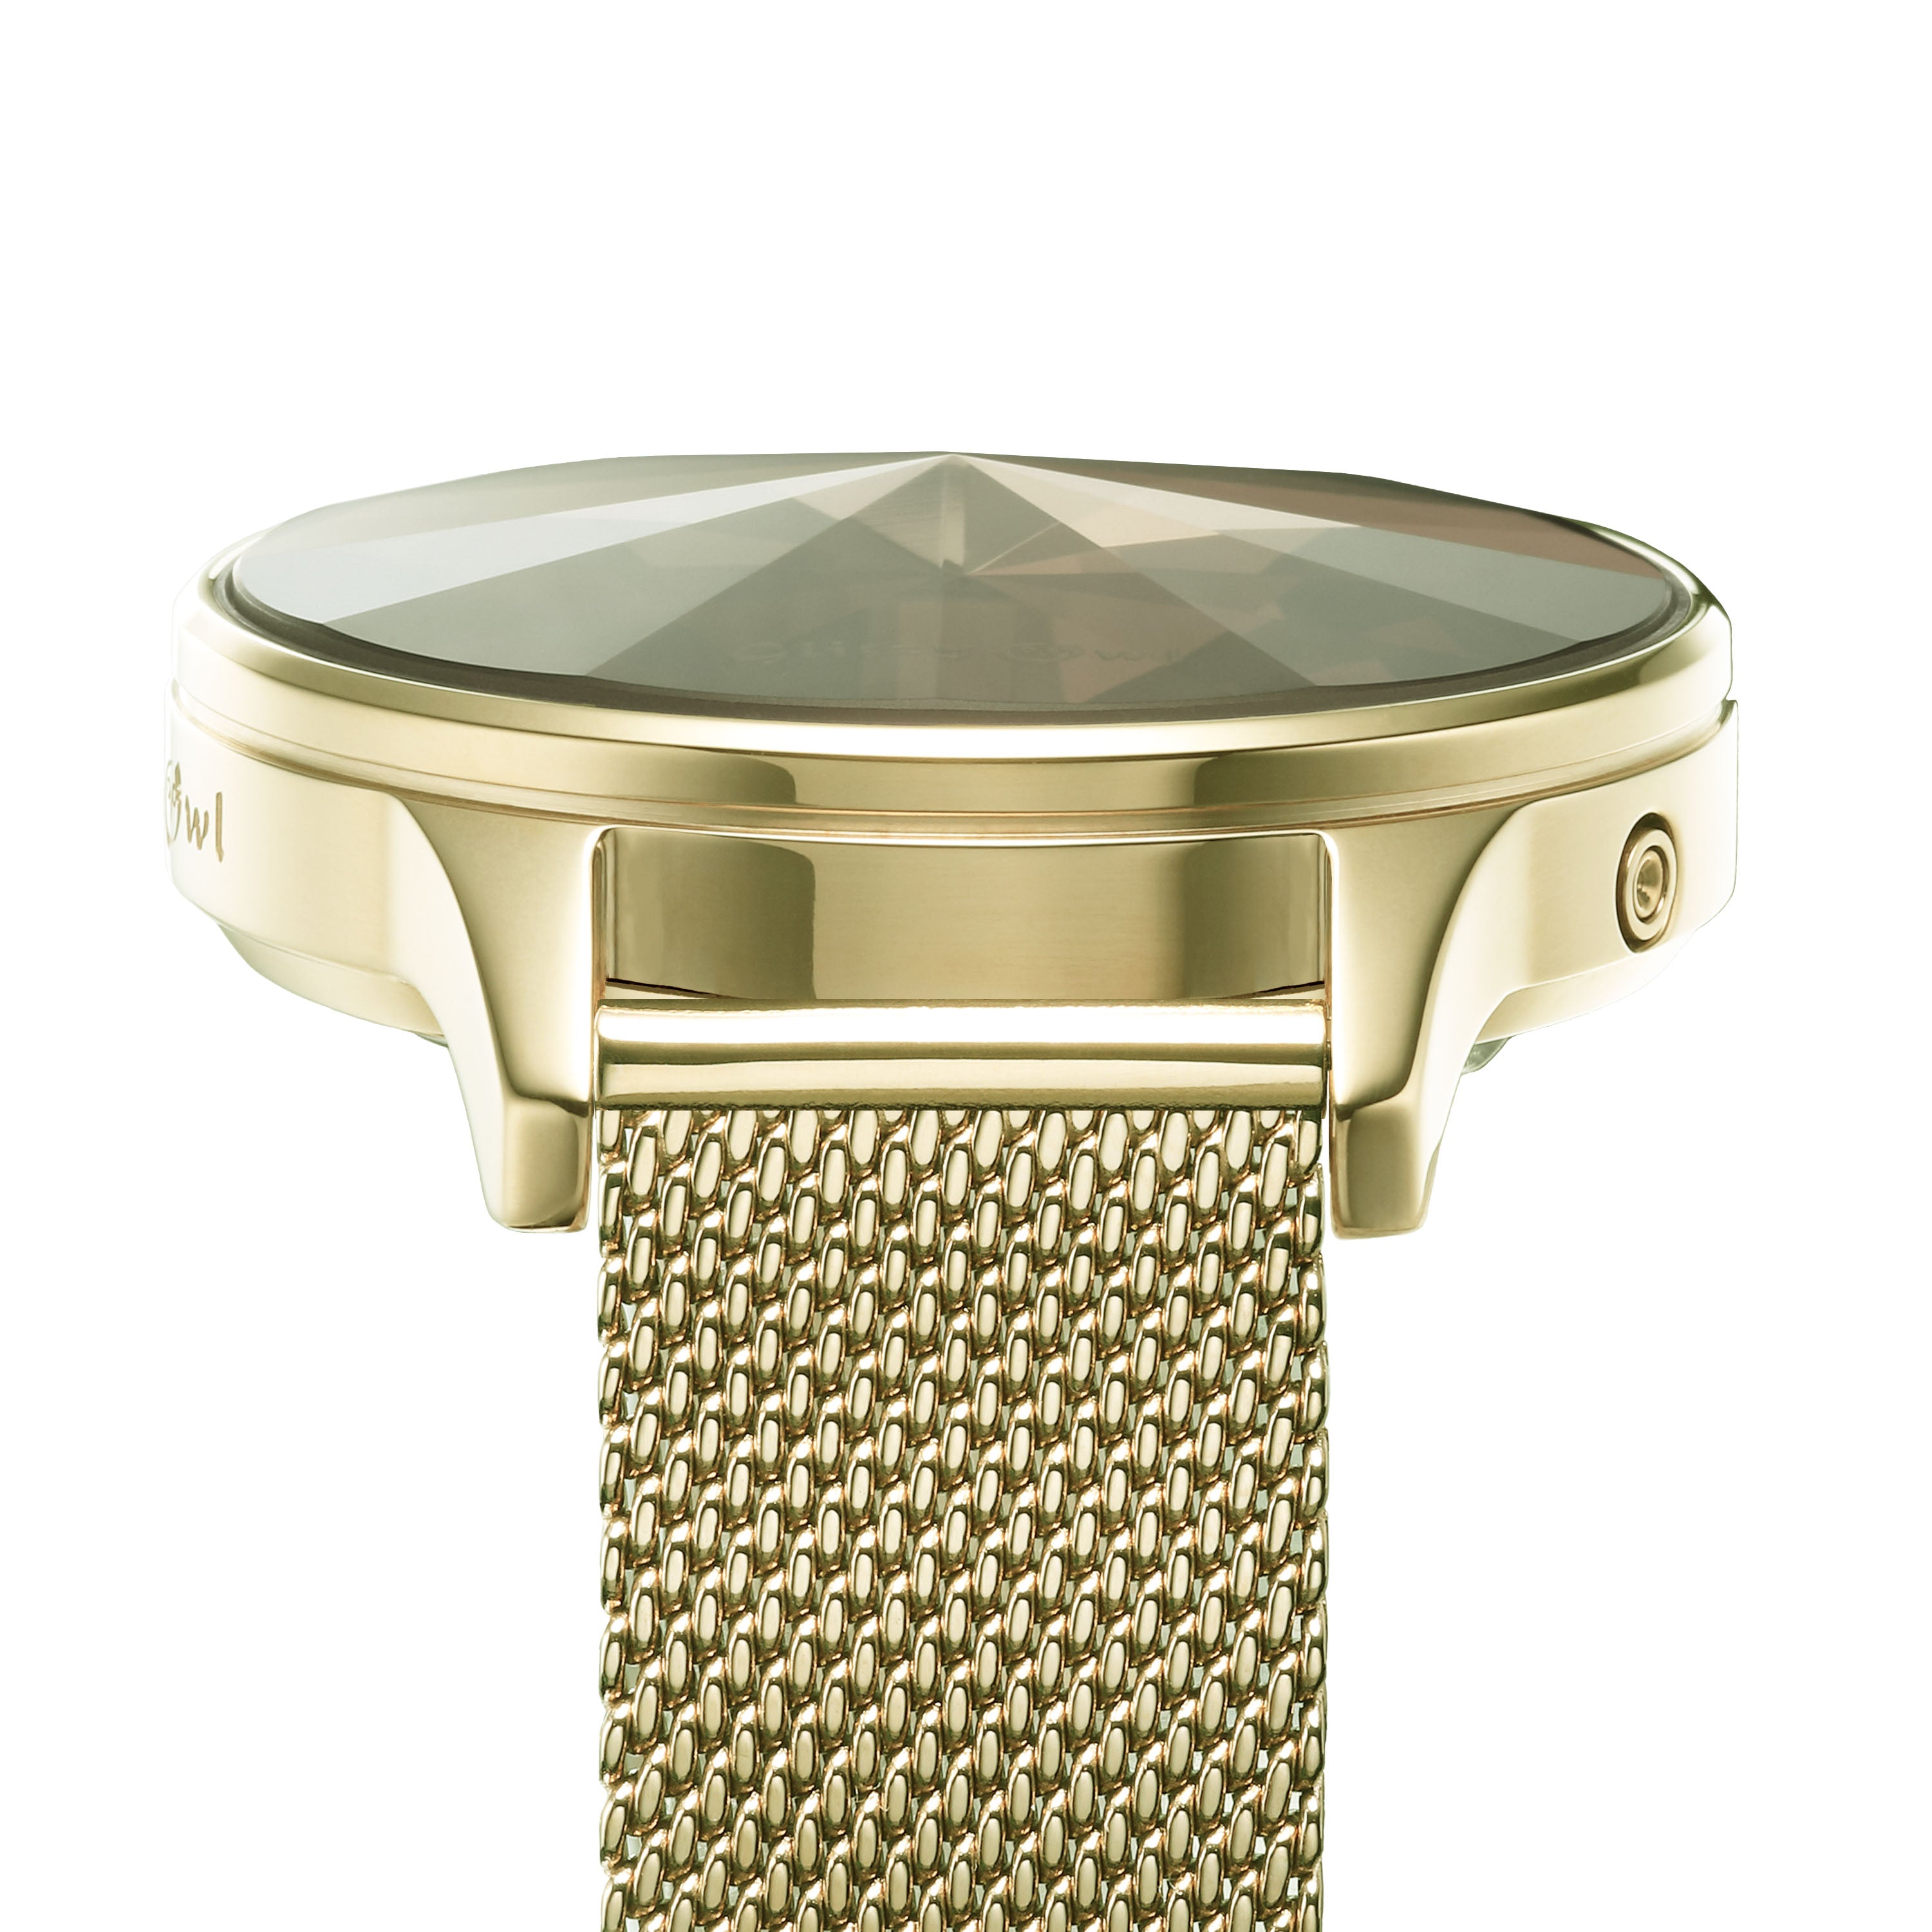 THE DIAMOND LED Gold-Tone Stainless Steel Watch